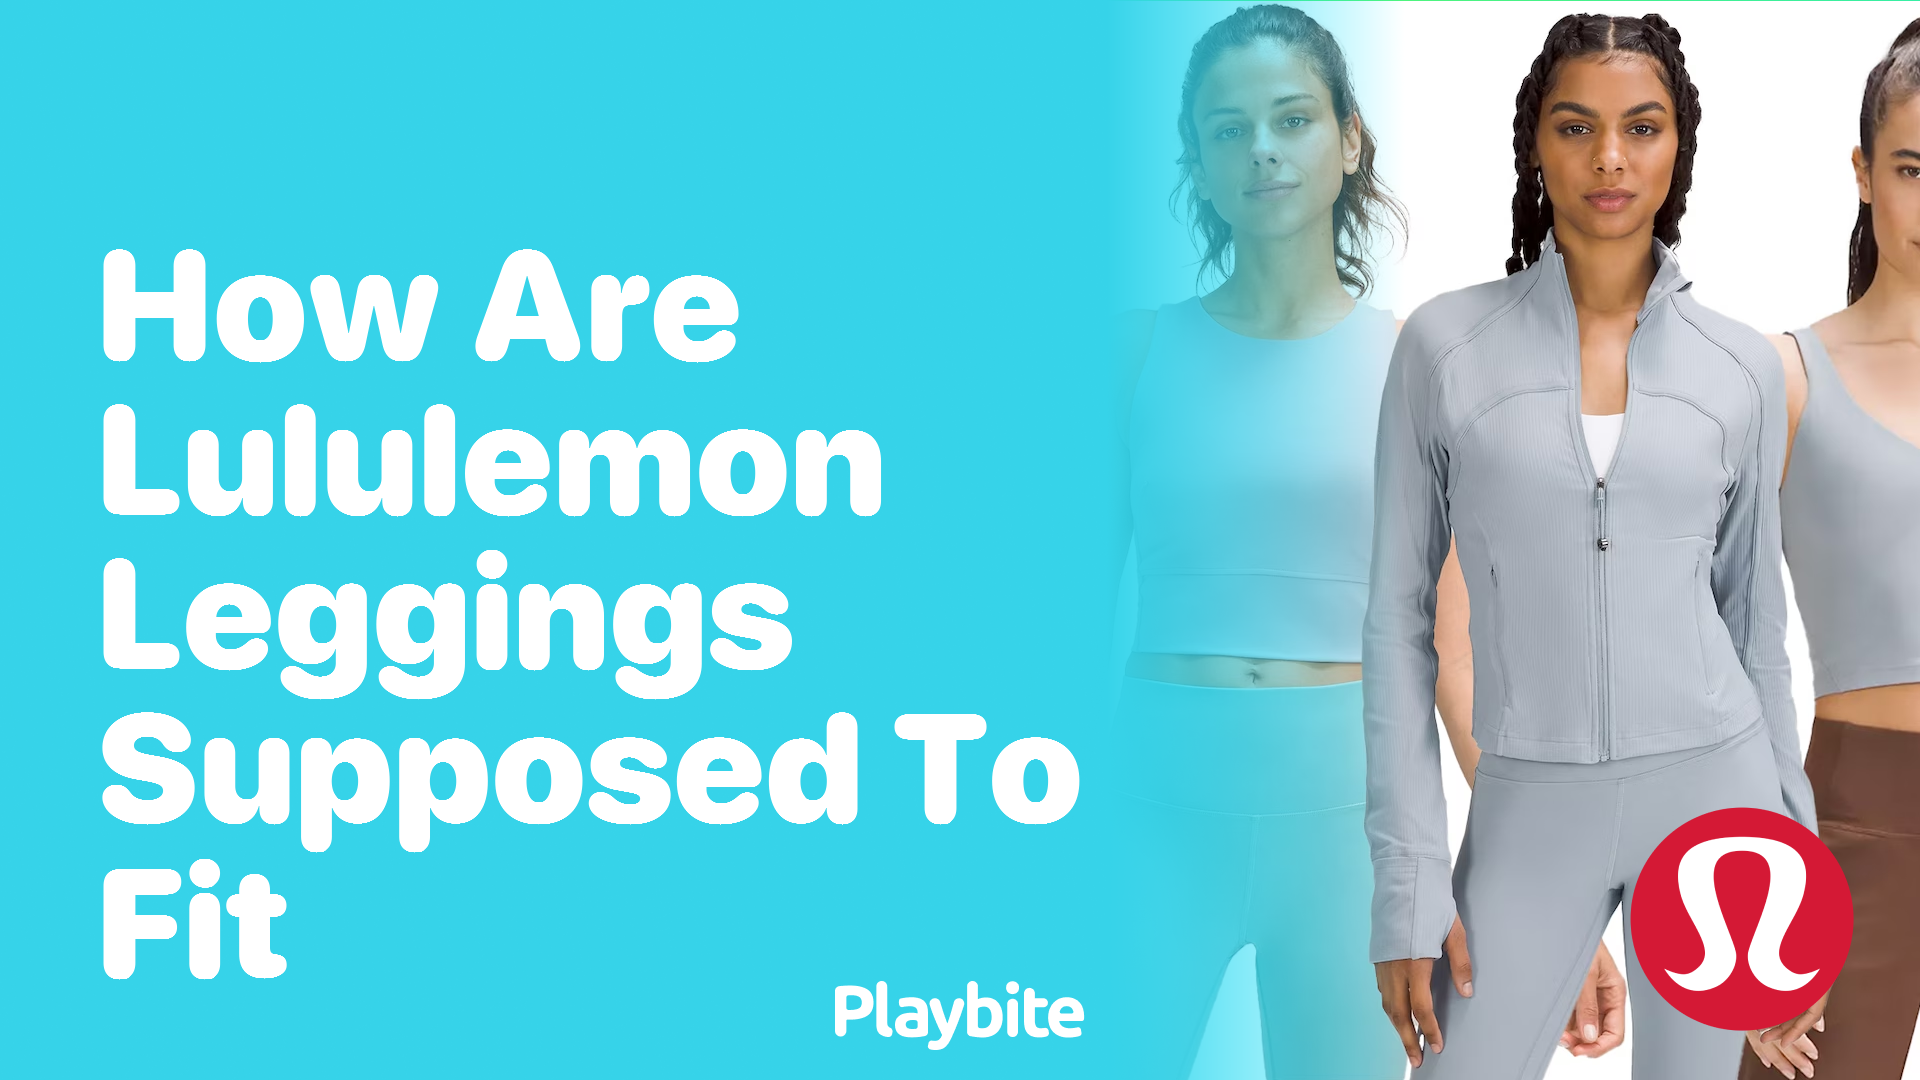 How Are Lululemon Leggings Supposed to Fit? - Playbite